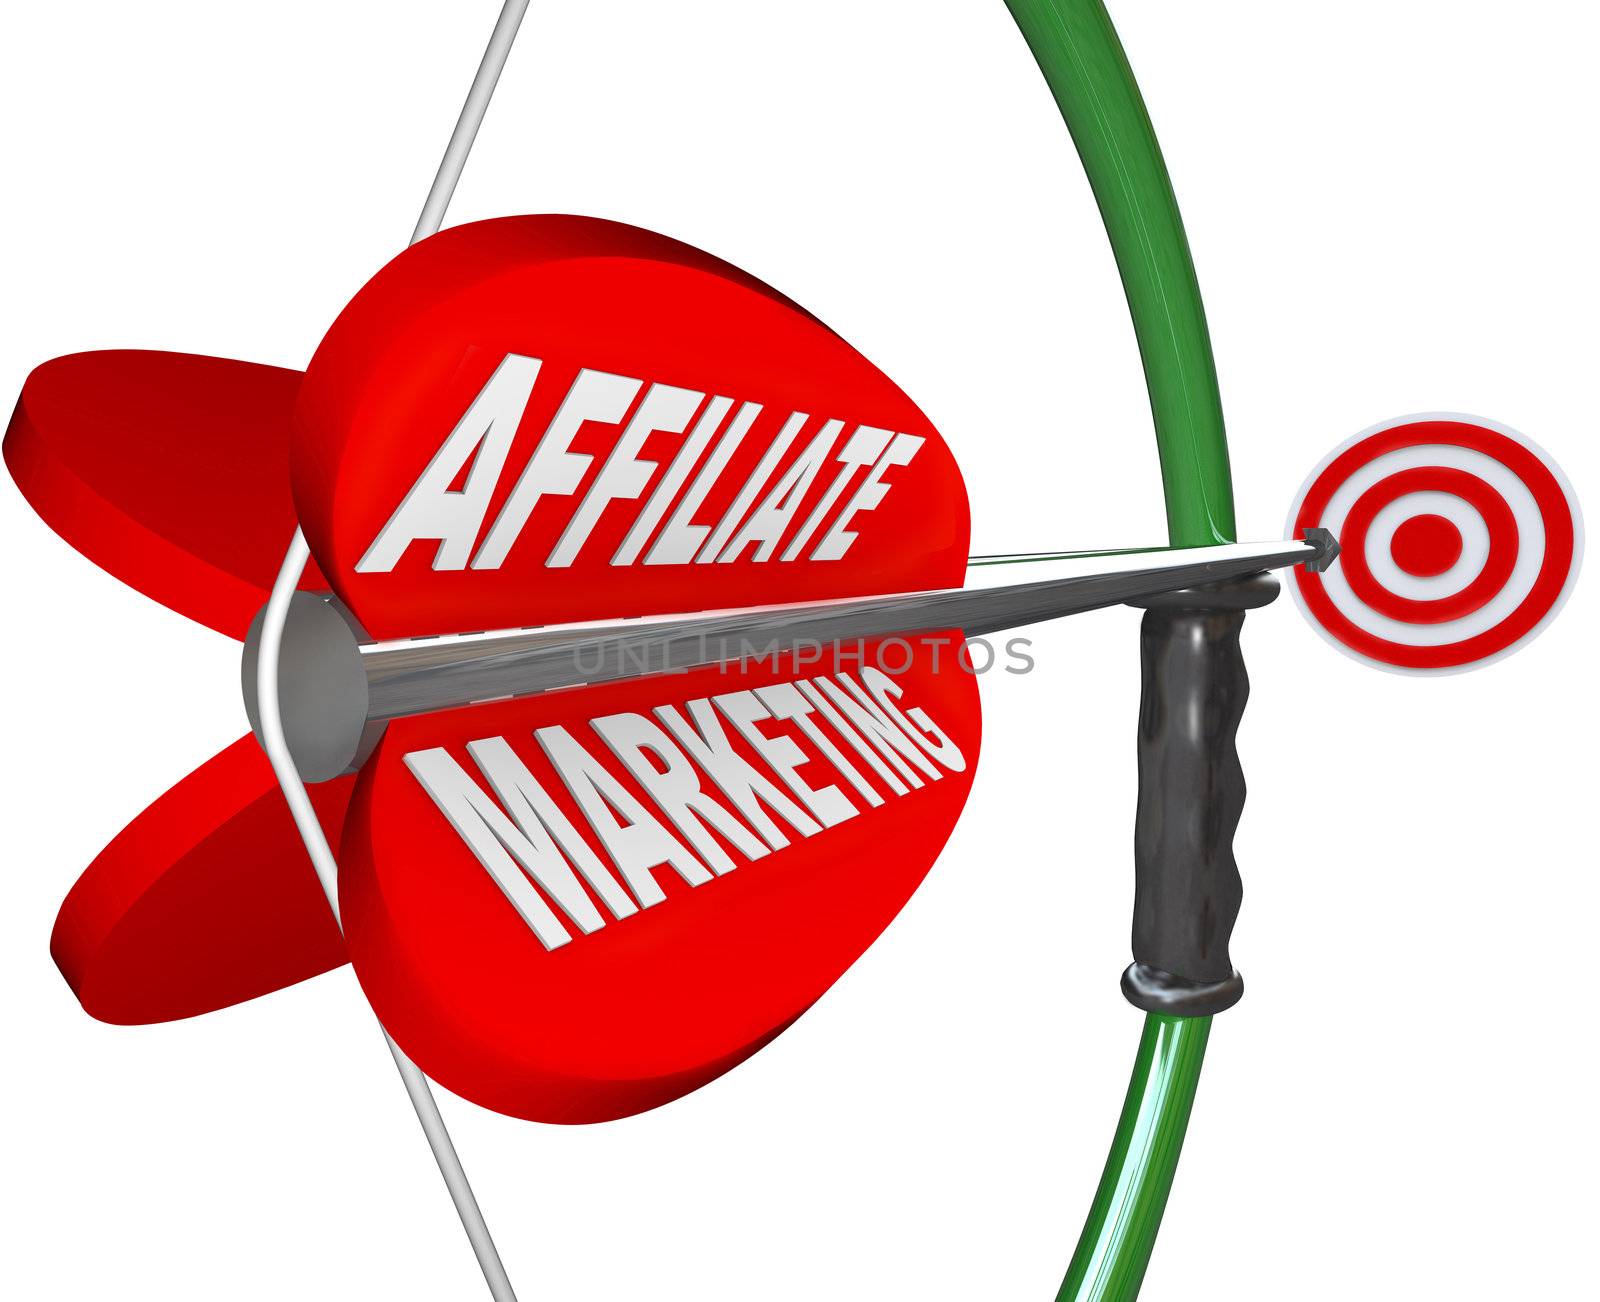 The words Affiliate Marketing on an arrow being aimed with a bow toward a target bulls-eye, representing a business with plan or strategy to make money as an advertising affiliate